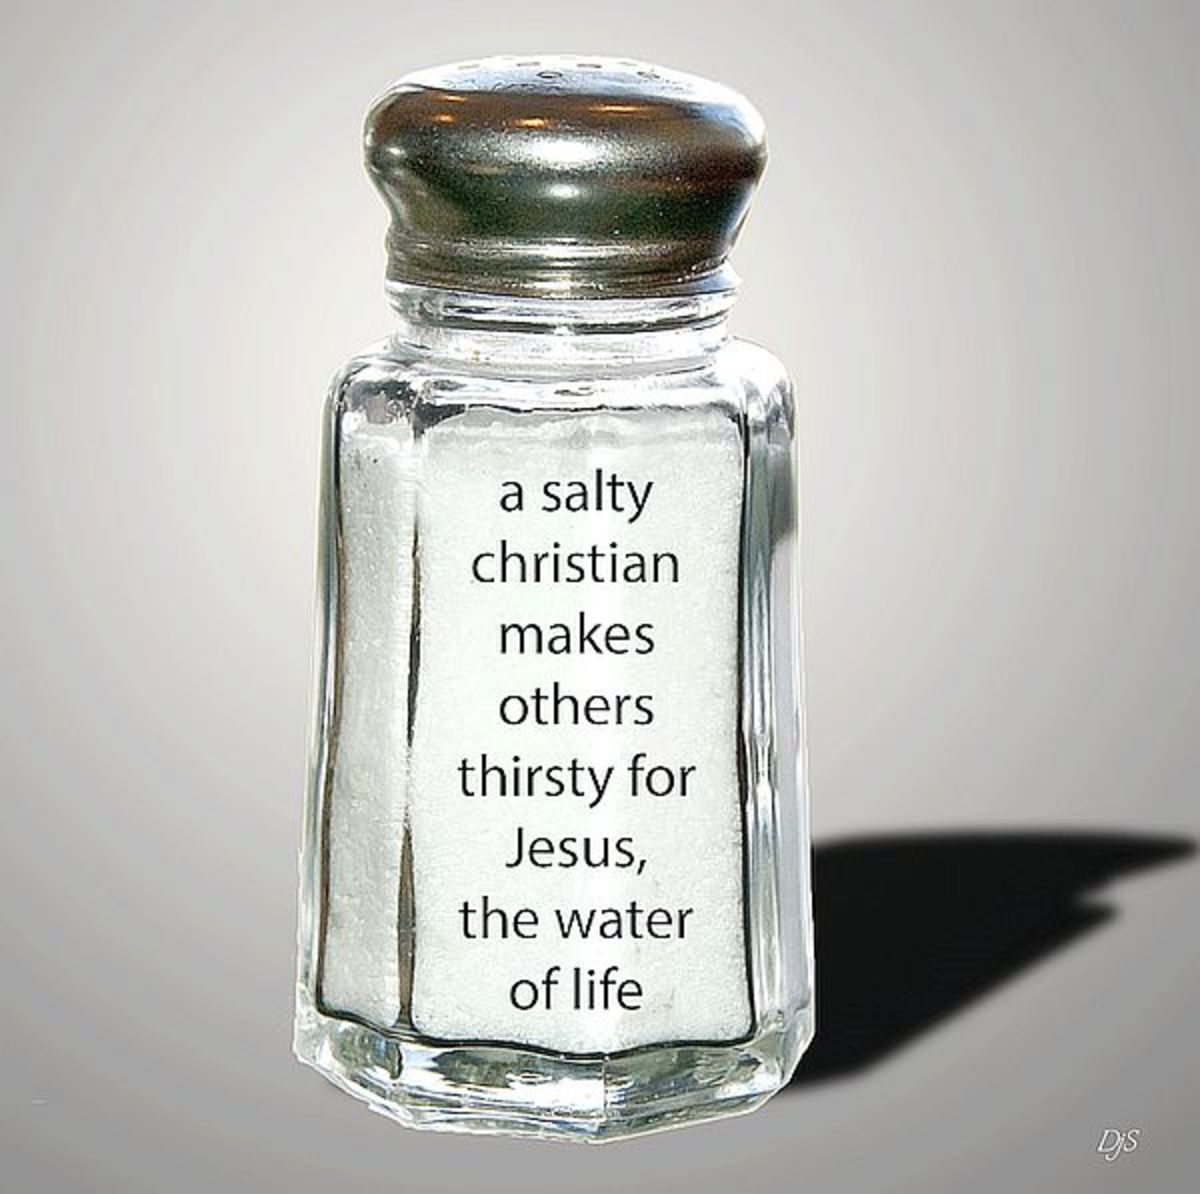 what-it-means-to-be-a-salty-christian